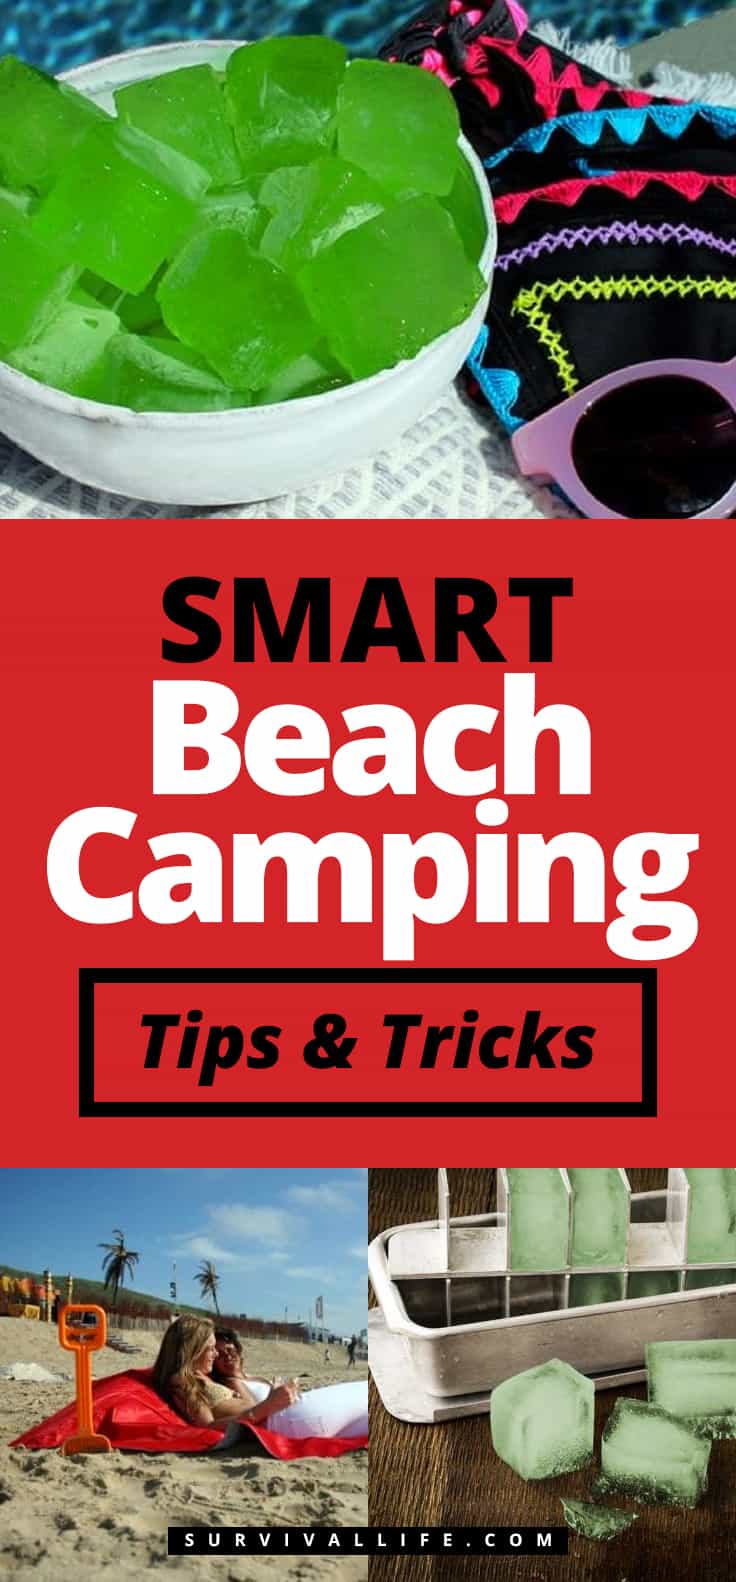 Smart Beach Camping Tips And Tricks | https://survivallife.com/beach-camping-smart-tips-tricks/